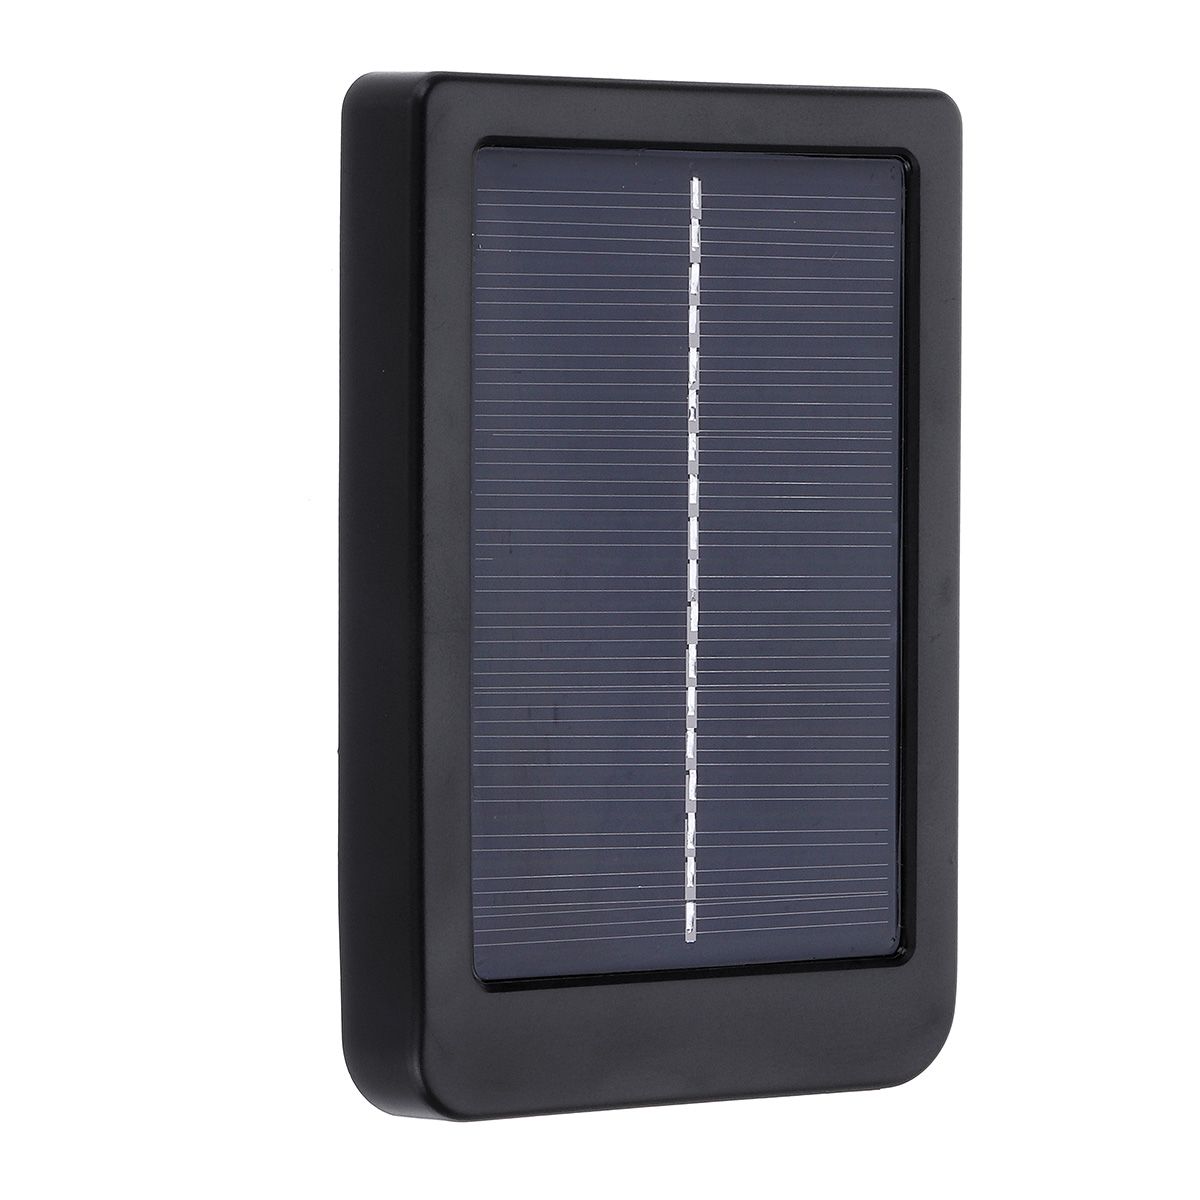 Hunting-Solar-Panel-Charger-for-HT-002LIM-HT-002A-HT-002LI-Series-Hunting-Camera-1727265